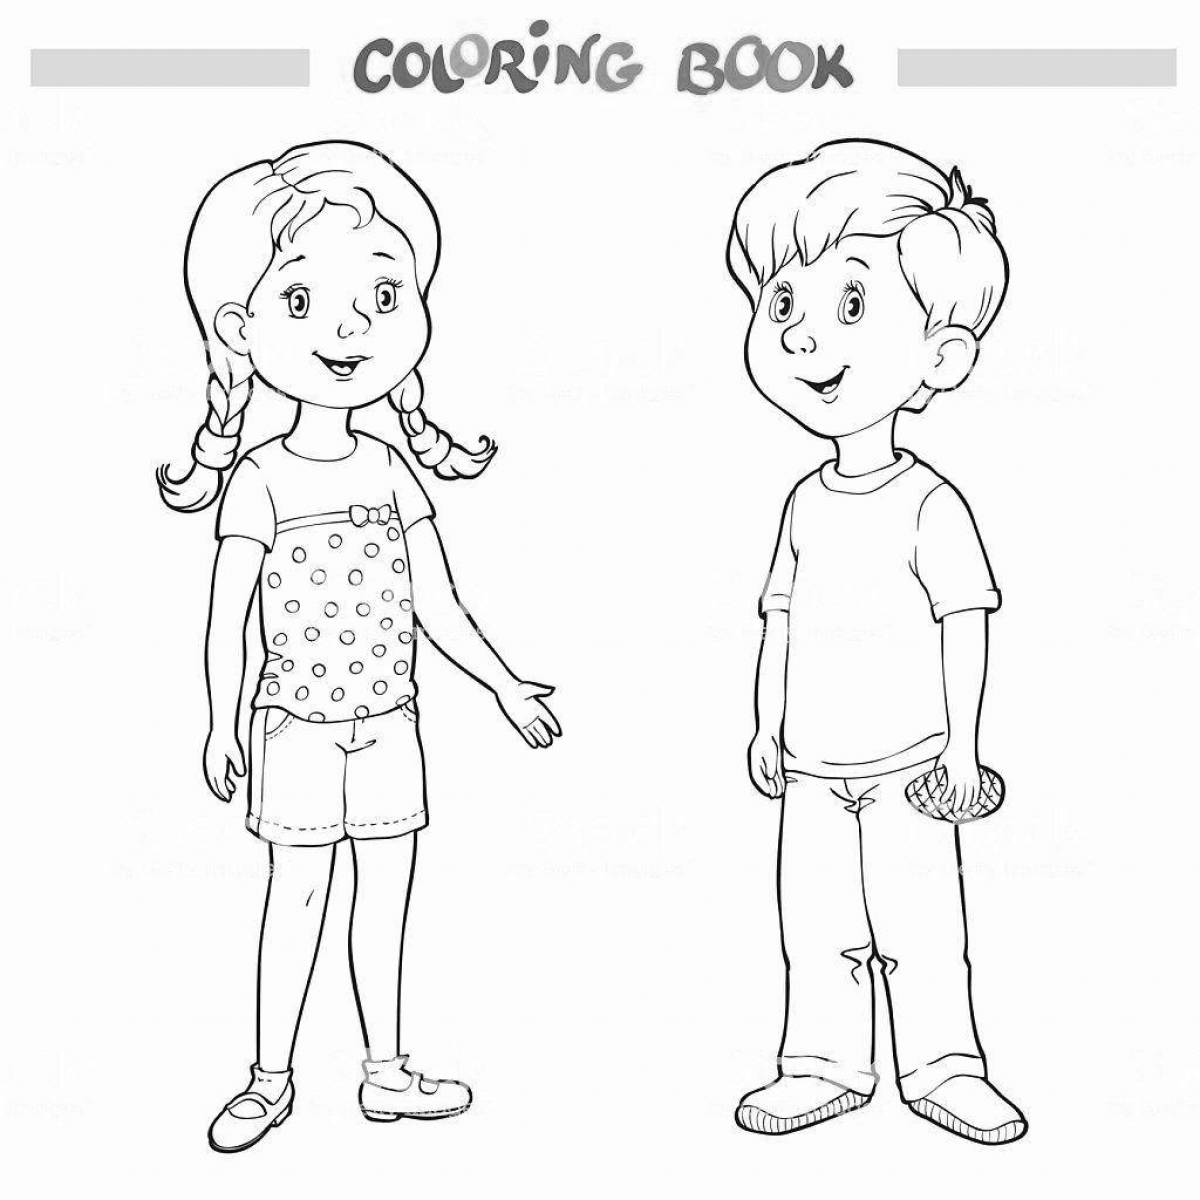 Energetic coloring drawing of a girl and a boy